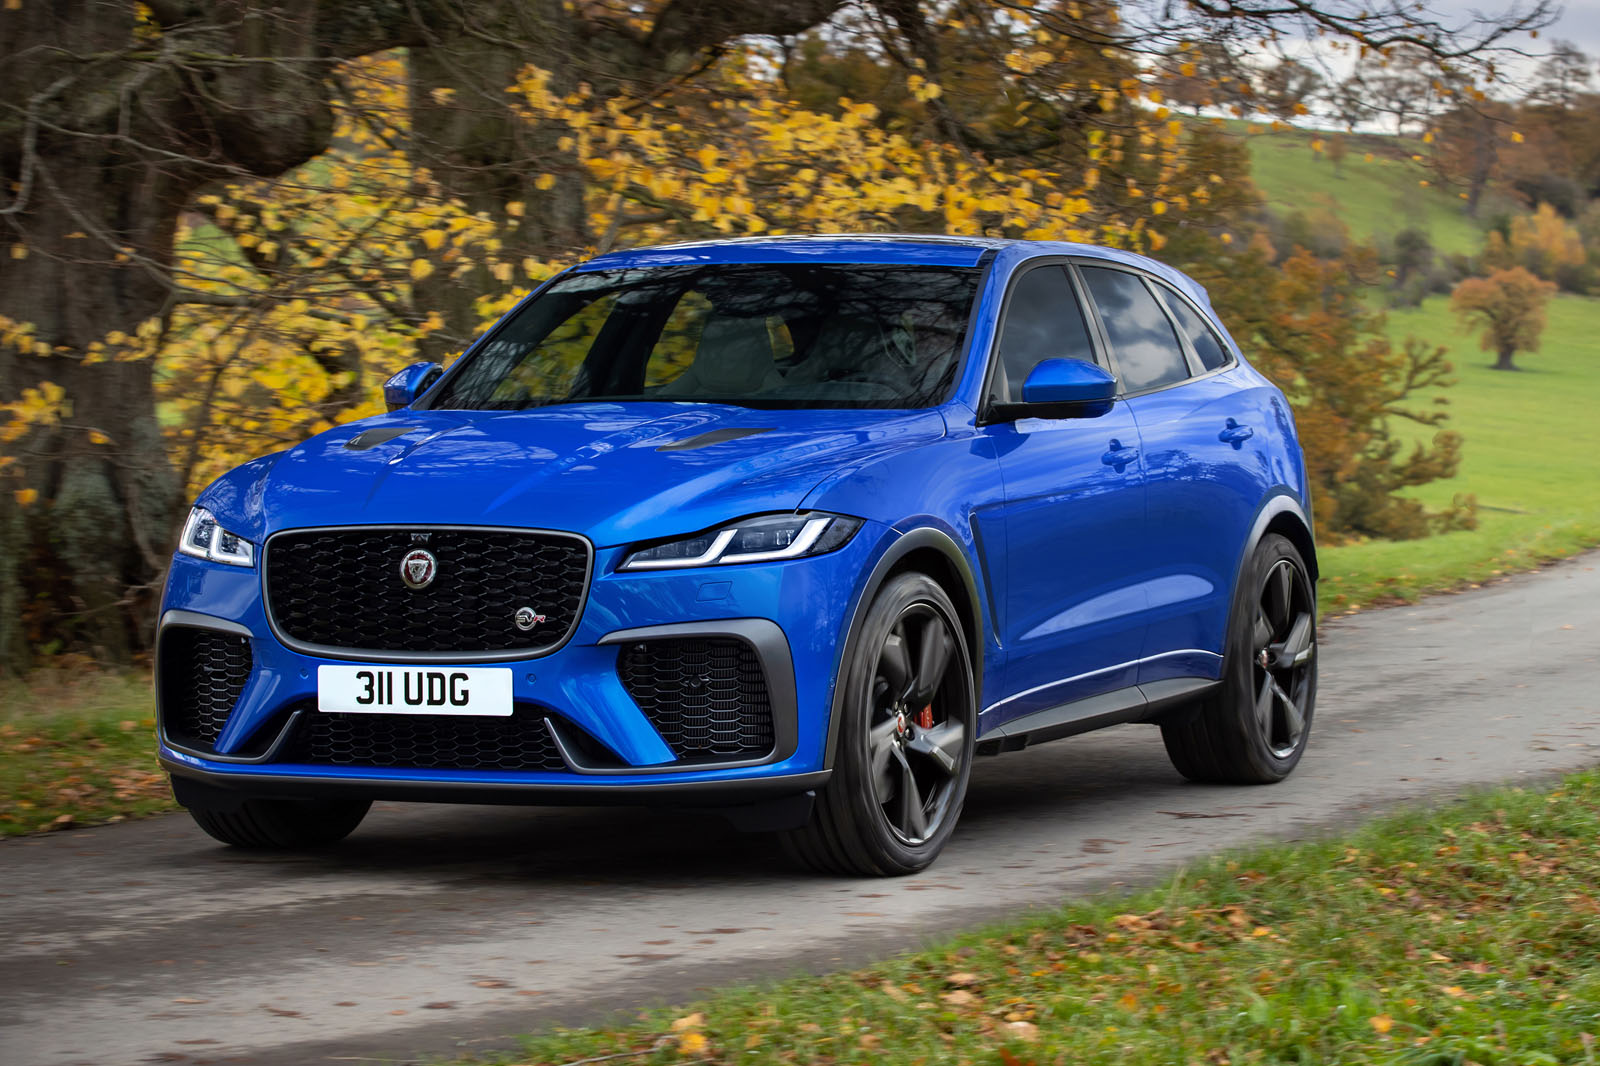 2021 Jaguar F-Pace SVR brings new look and performance boost | Autocar